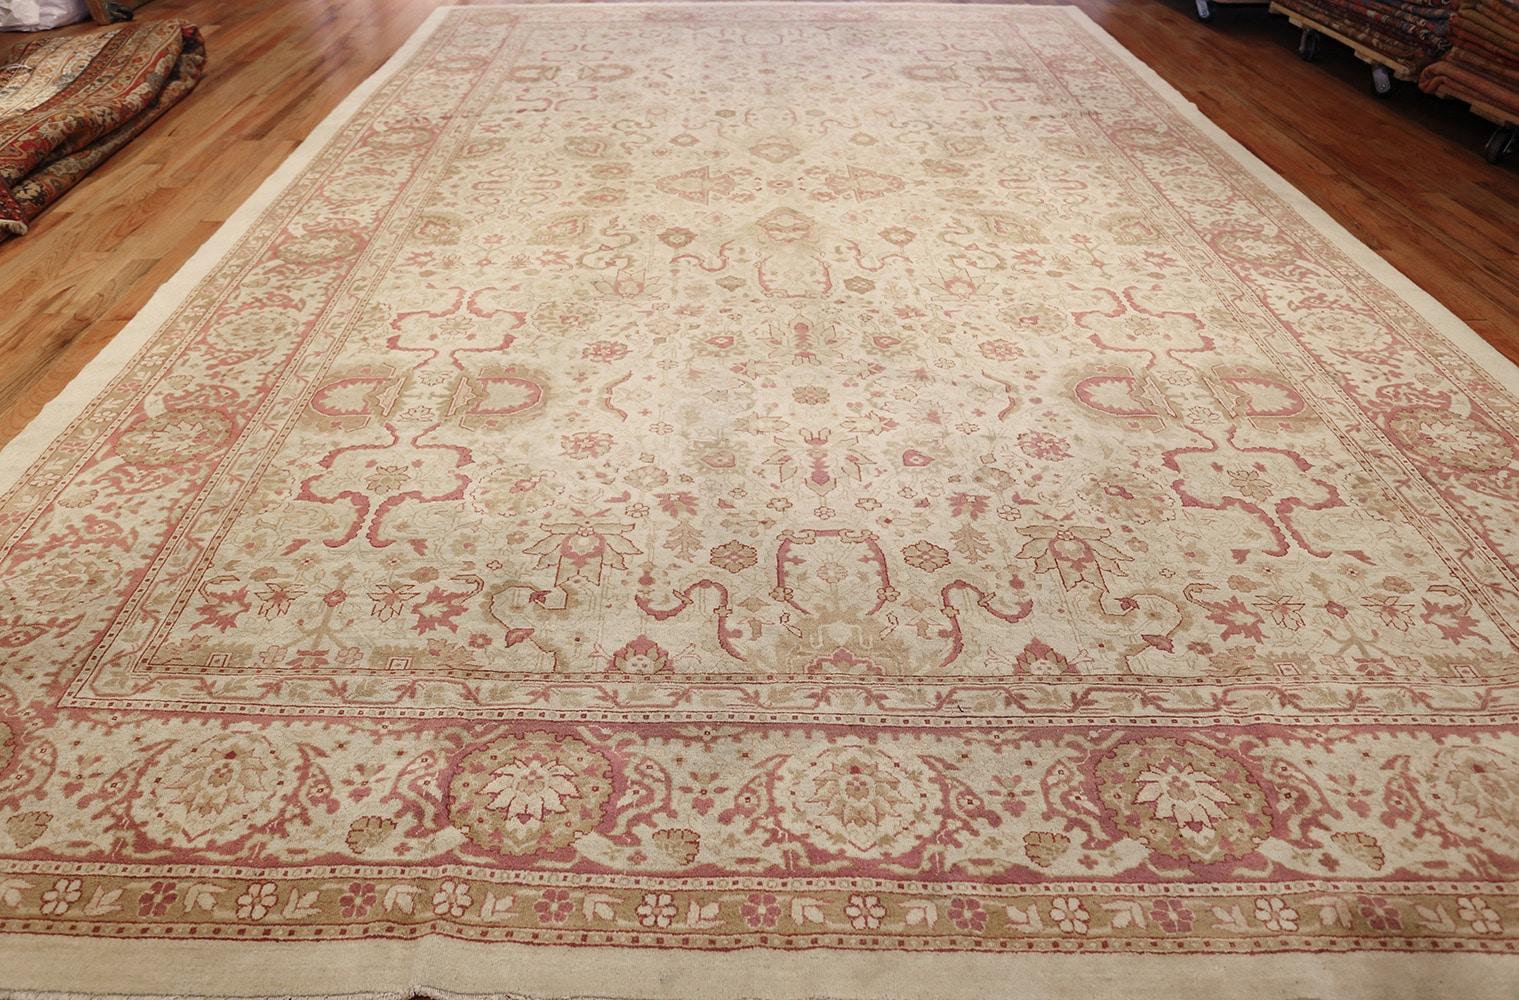 Antique Indian Amritsar Carpet. Size: 11 ft x 17 ft 6 in (3.35 m x 5.33 m) 1